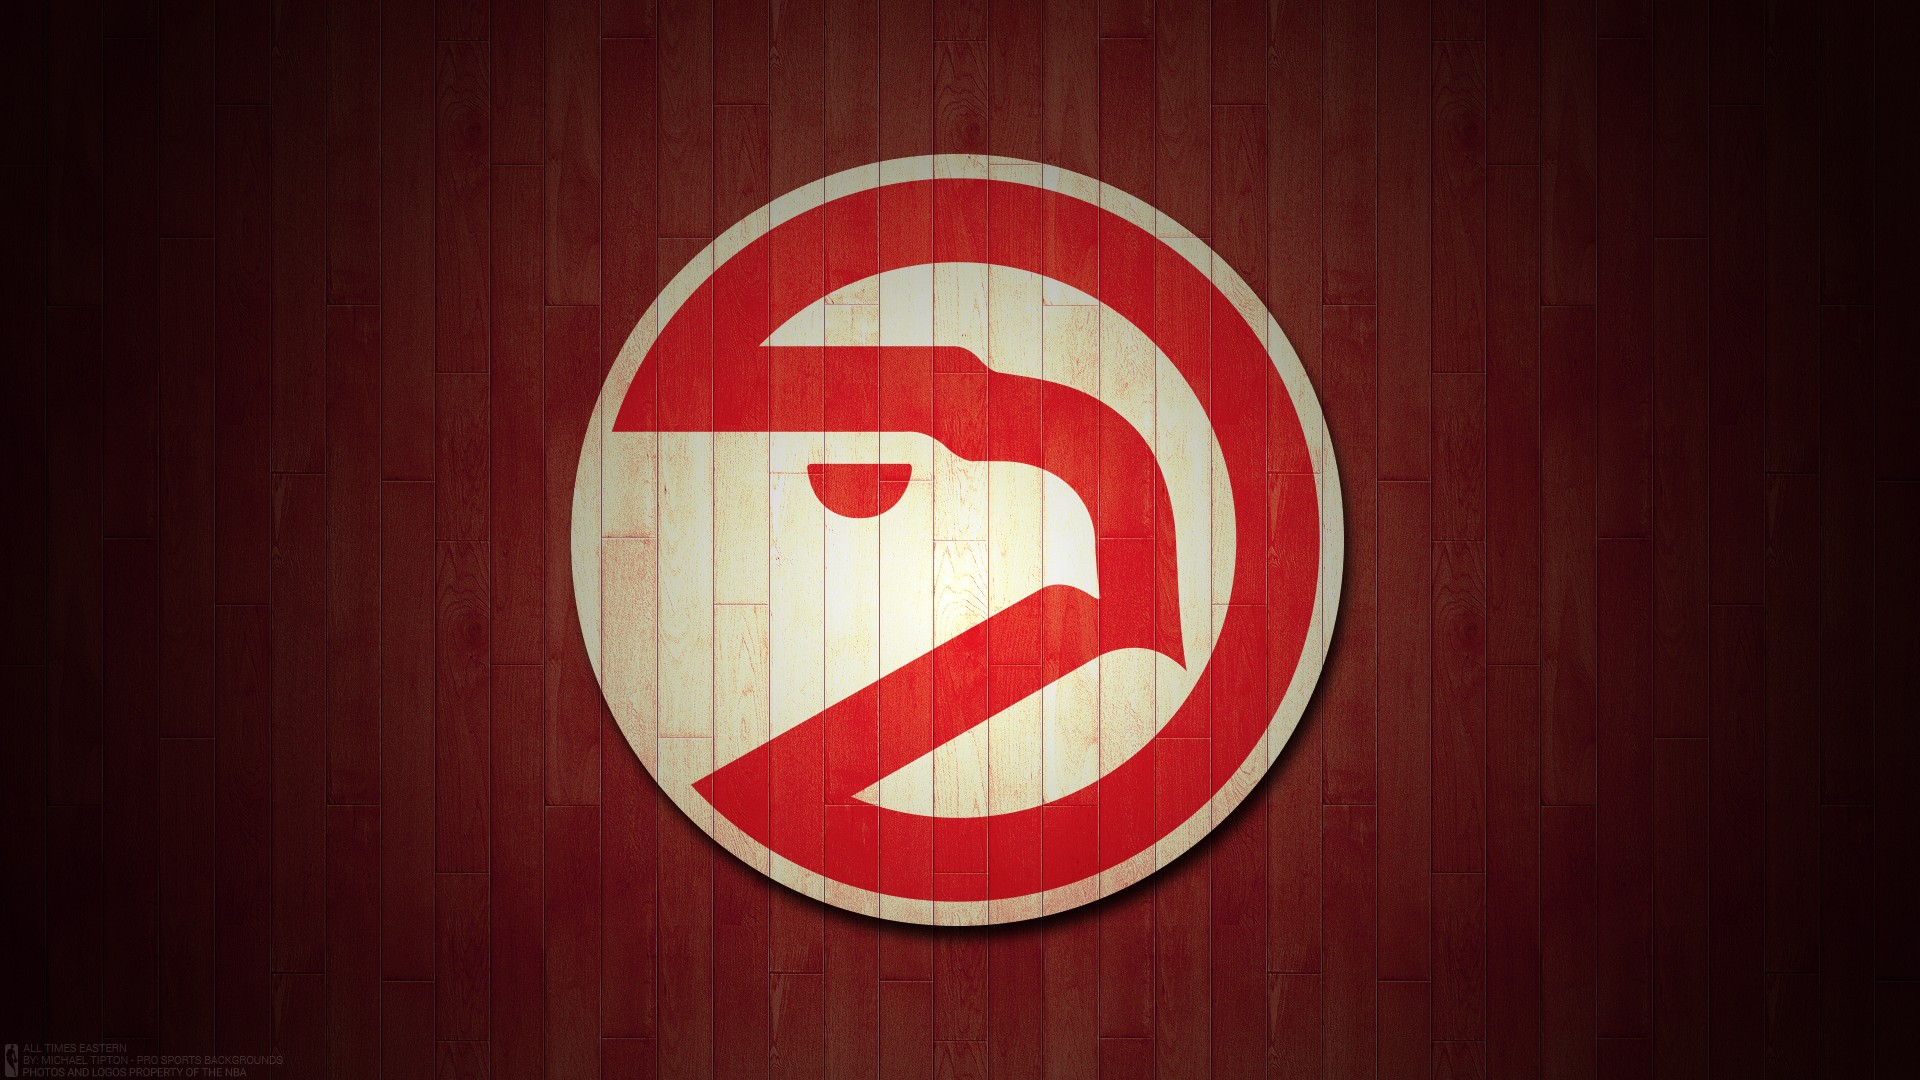 Wallpaper Desktop Atlanta Hawks HD with image dimensions 1920x1080 pixel. You can make this wallpaper for your Desktop Computer Backgrounds, Windows or Mac Screensavers, iPhone Lock screen, Tablet or Android and another Mobile Phone device